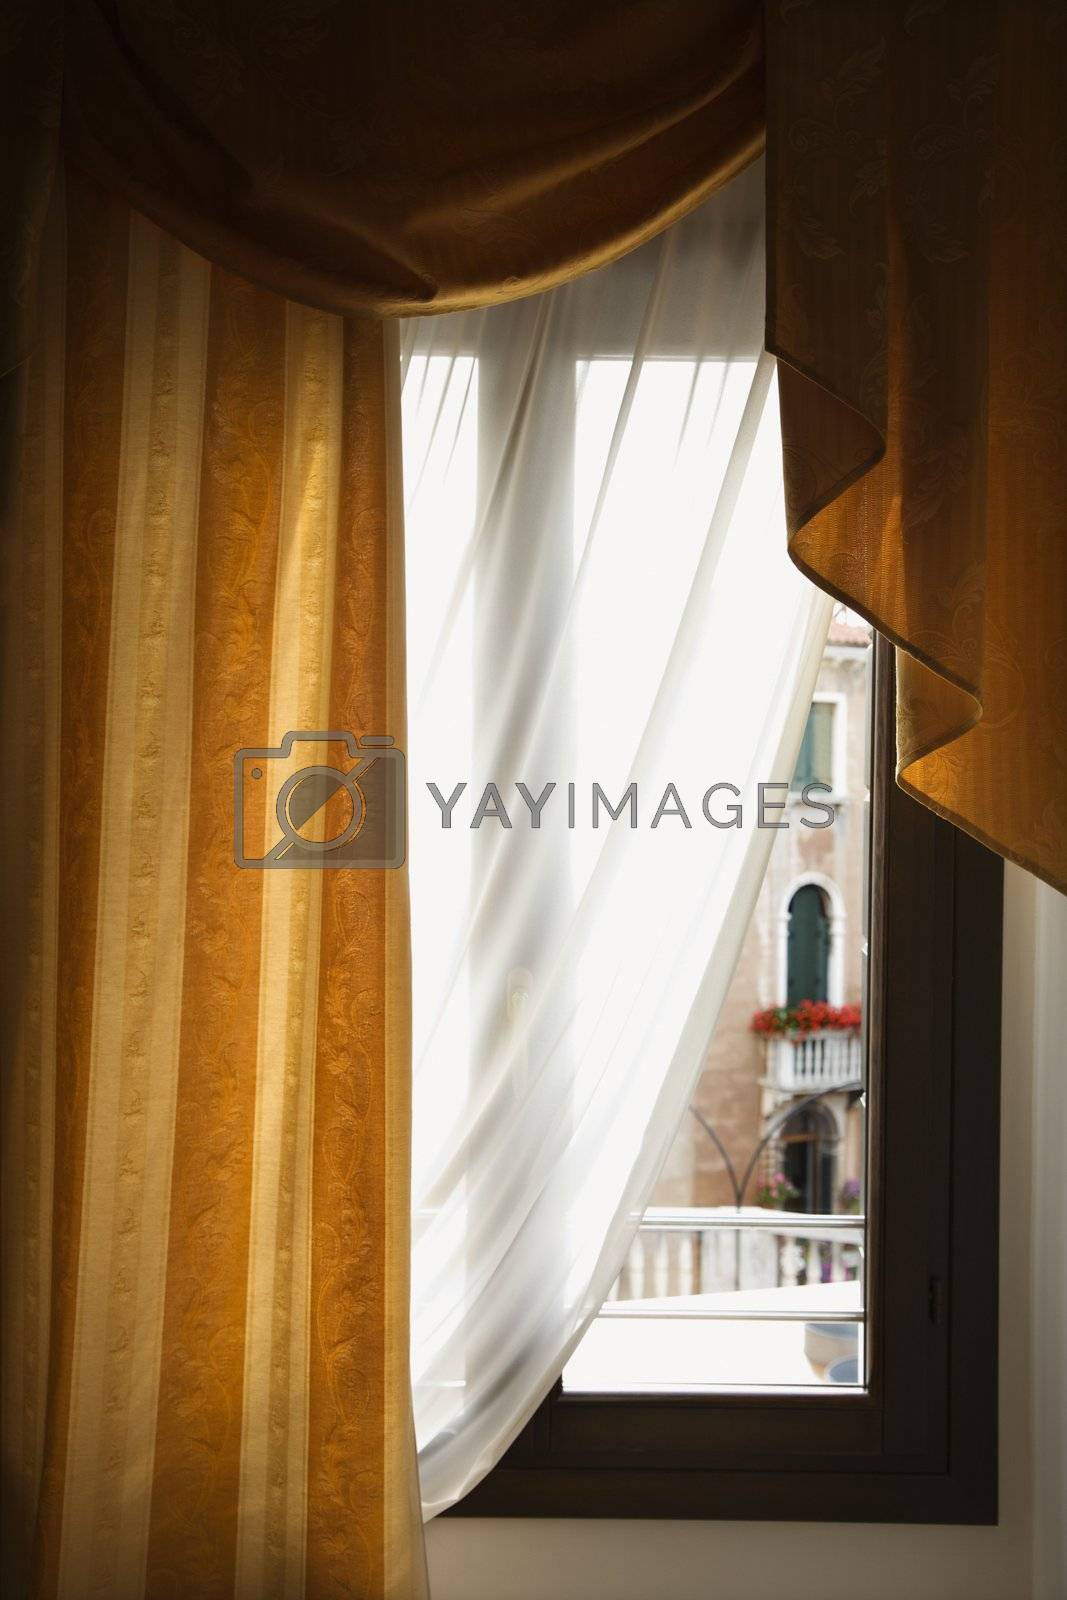 Royalty free image of Window with drapes. by iofoto